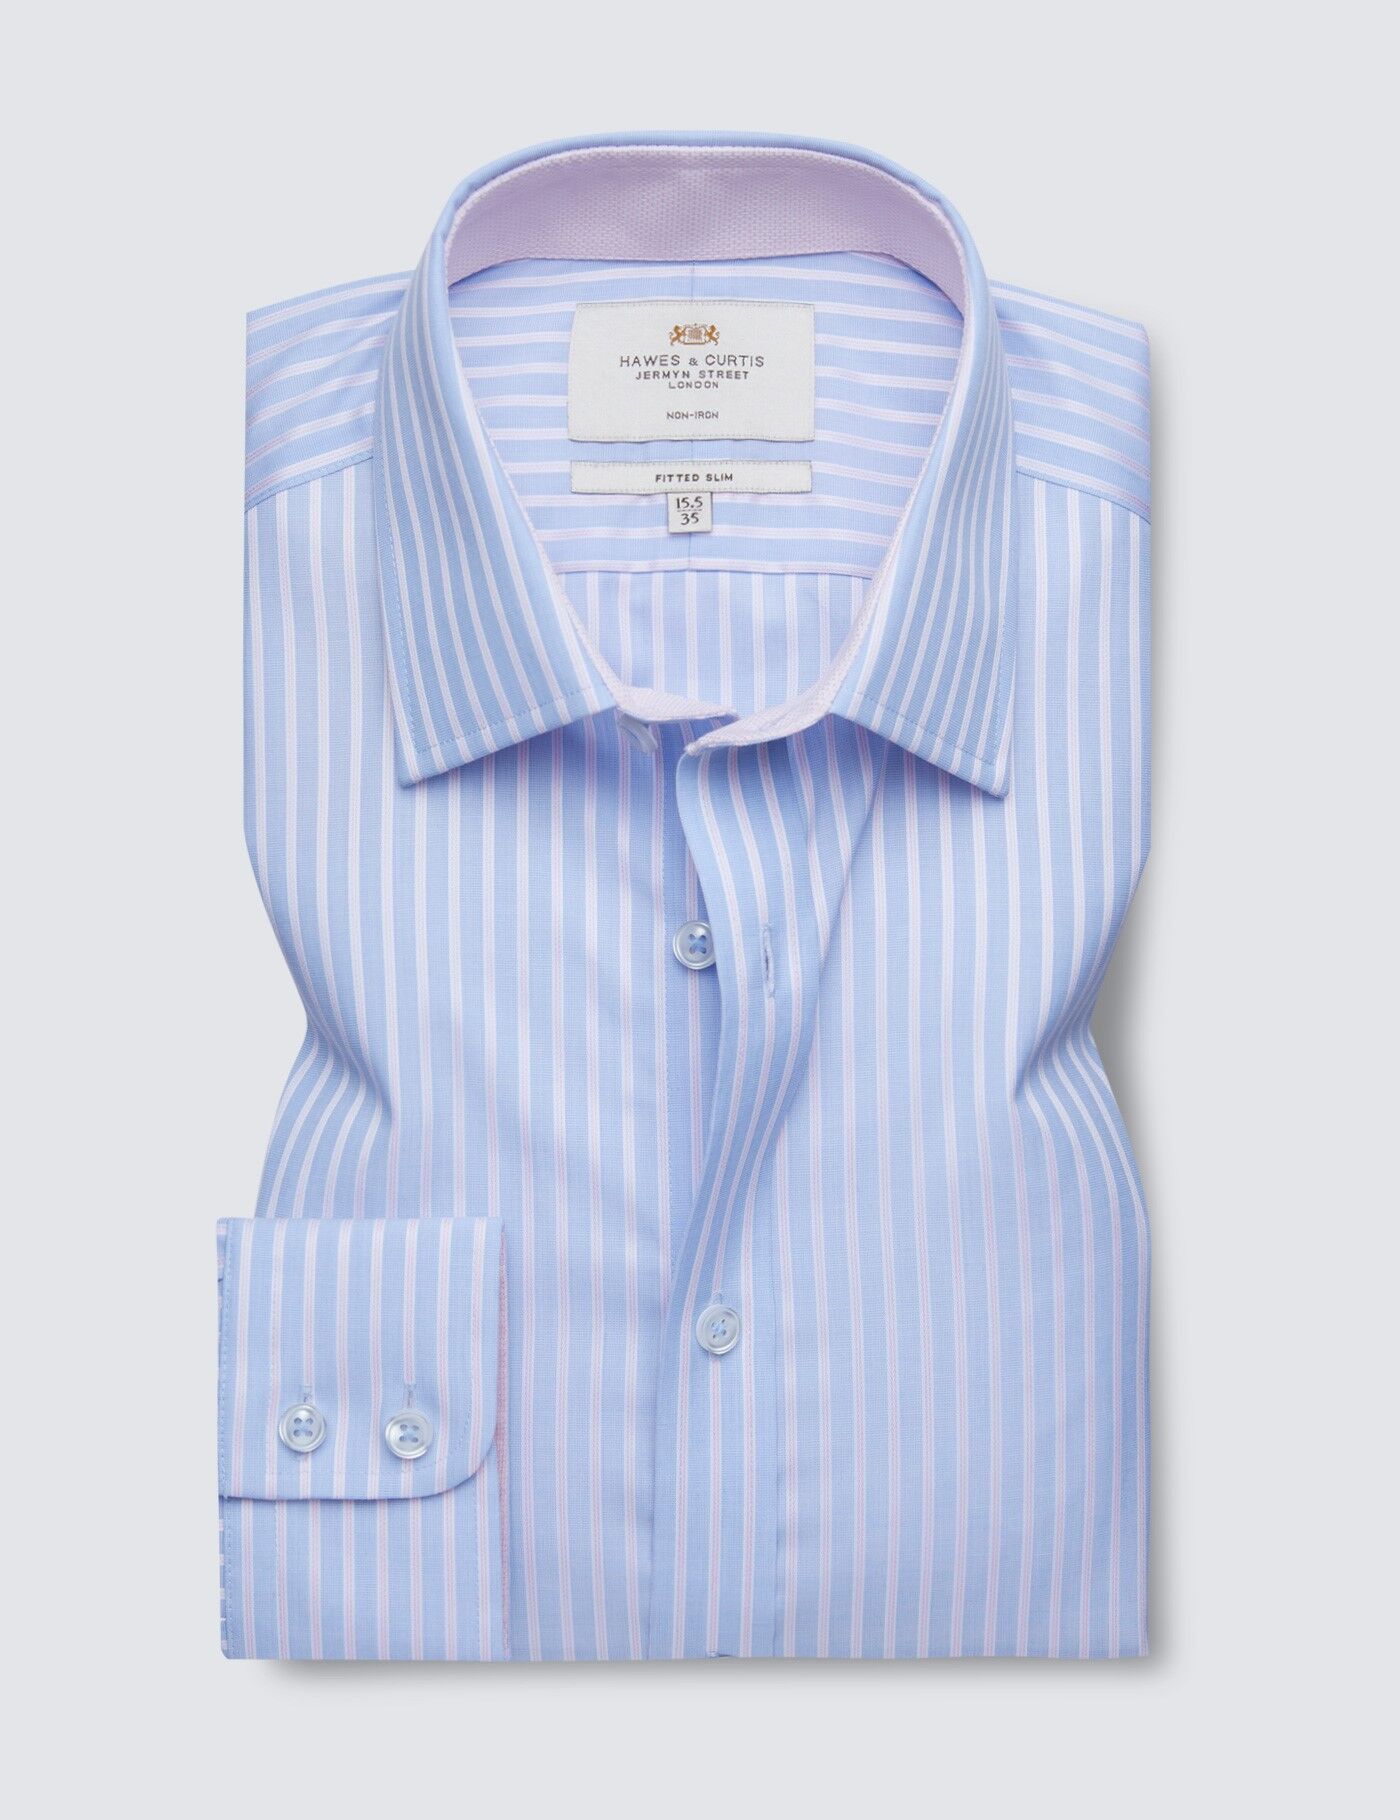 Hawes & Curtis Men's Non Iron Stripe Fitted Slim Shirt in Blue/Pink   Size 16.5/34   Contrast Detail